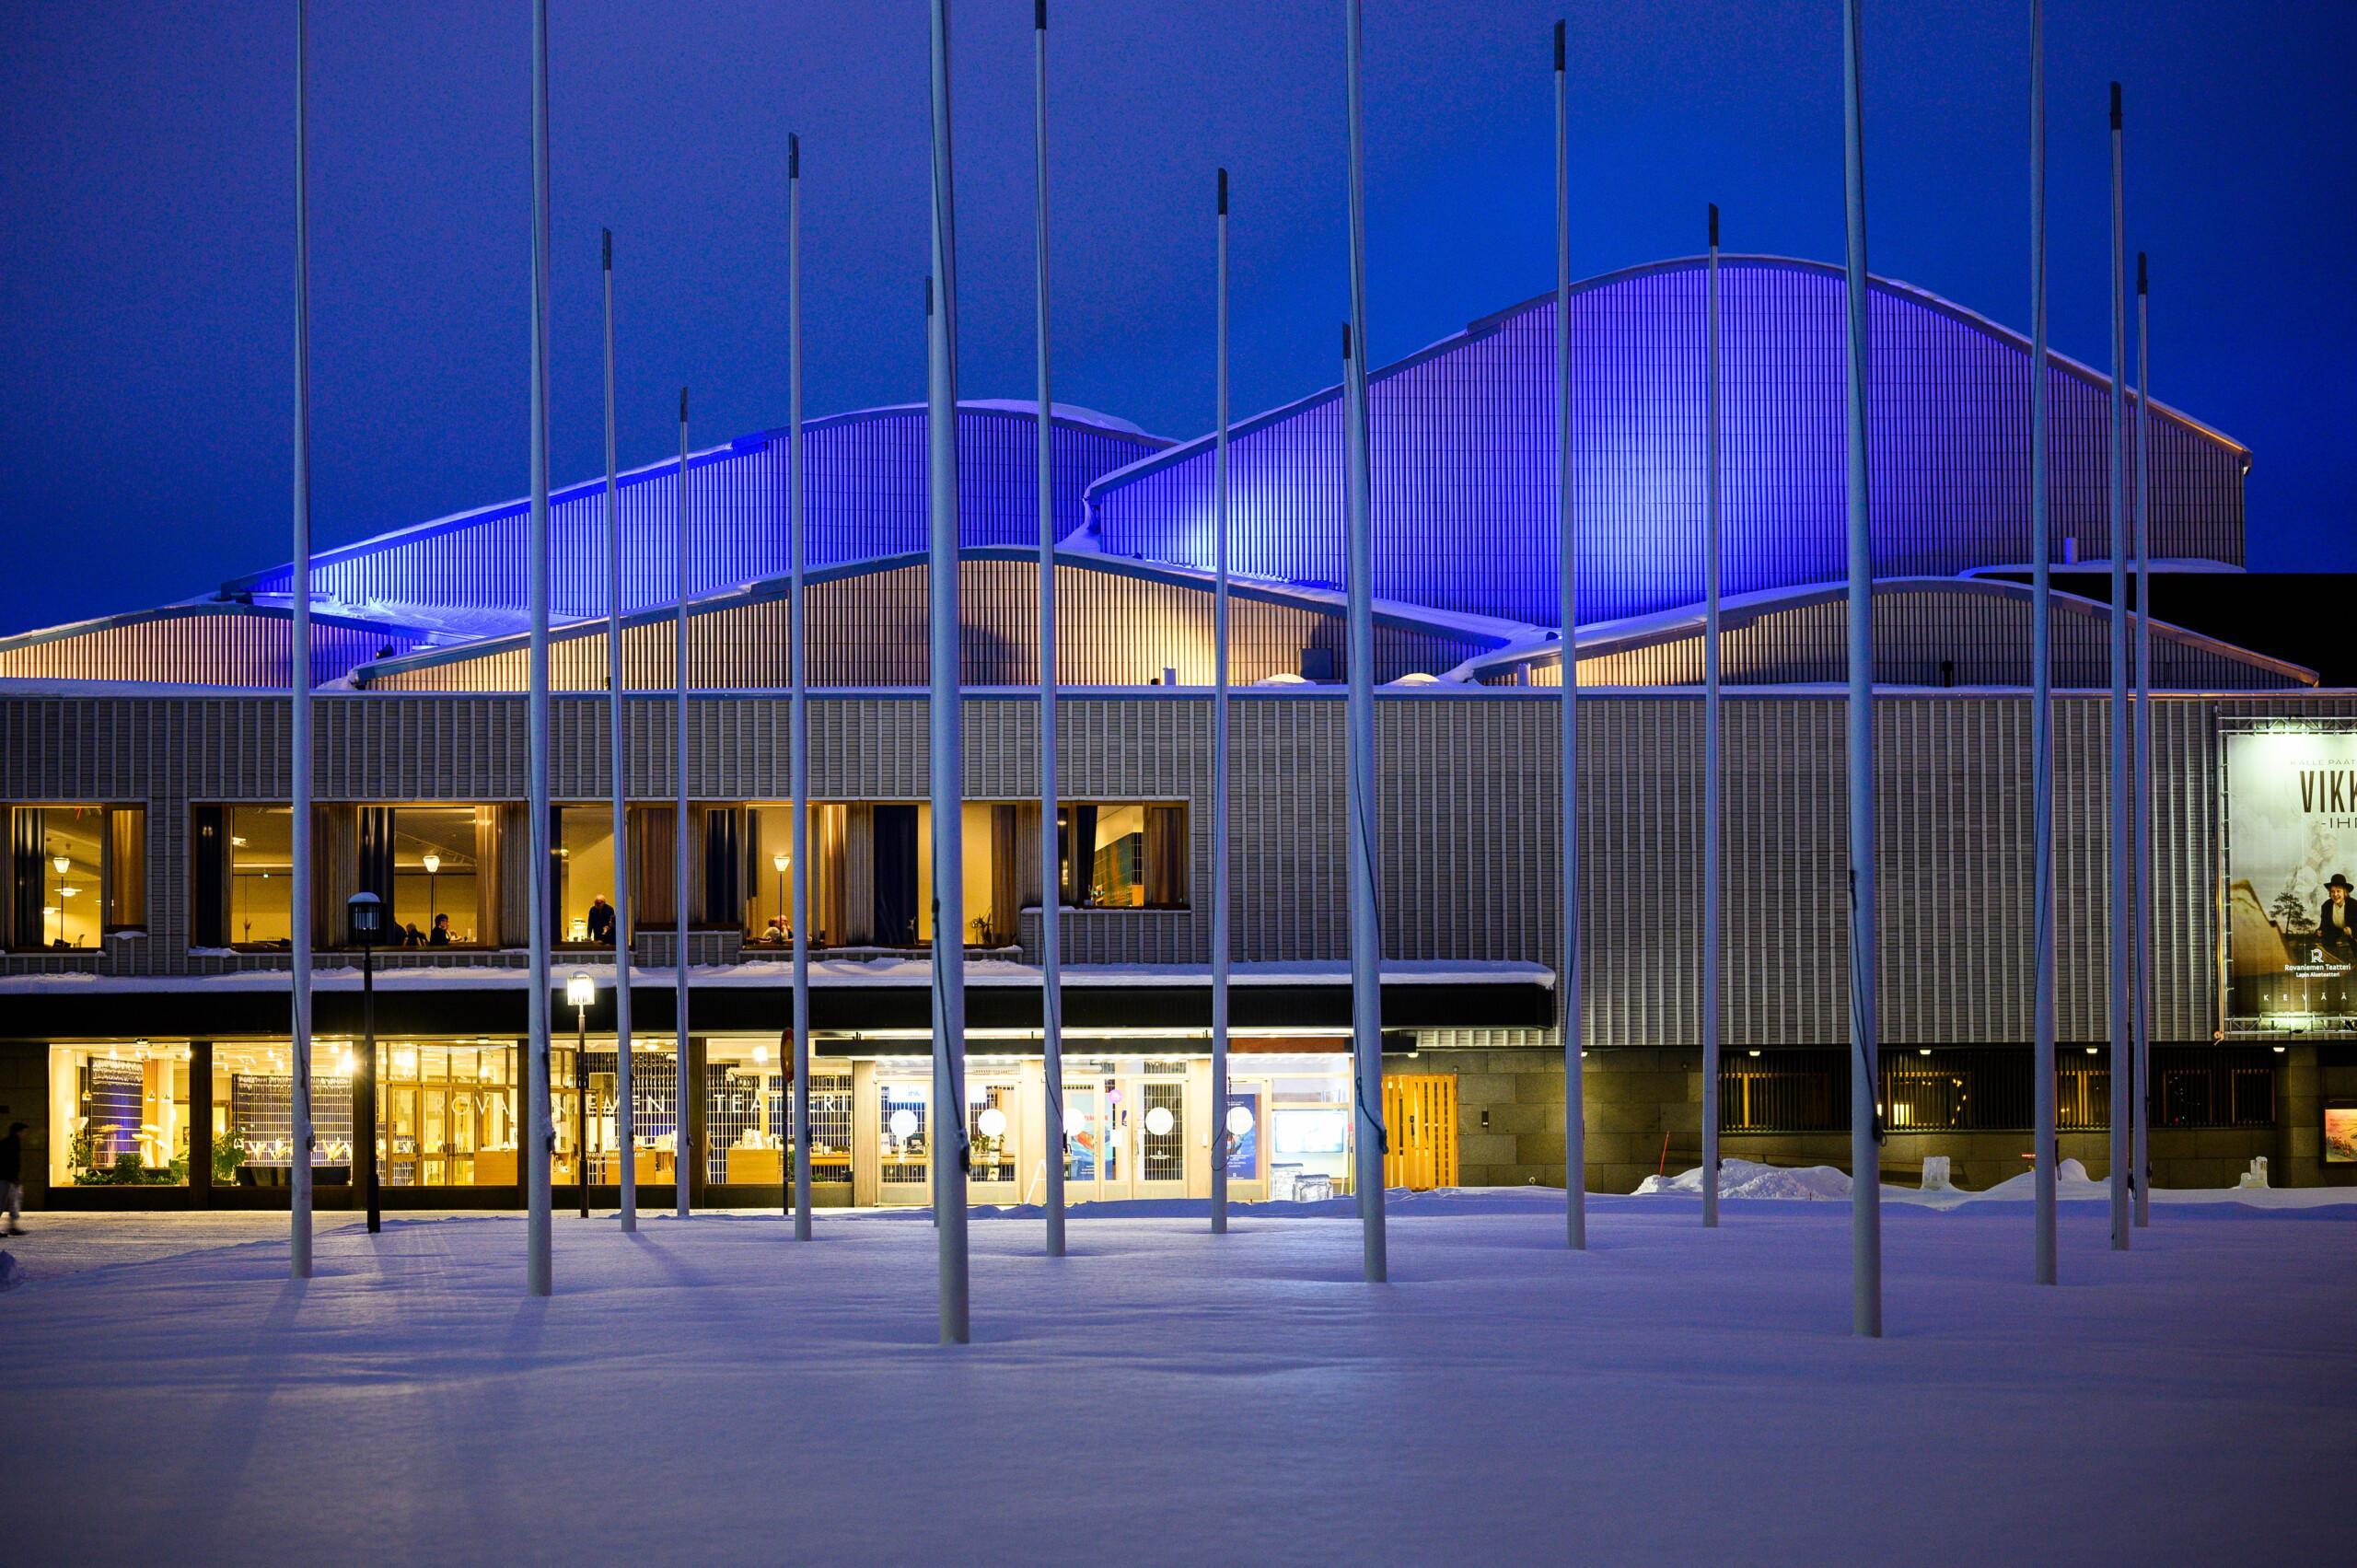 Lappia Hall in the colors of the Ukrainian flag.